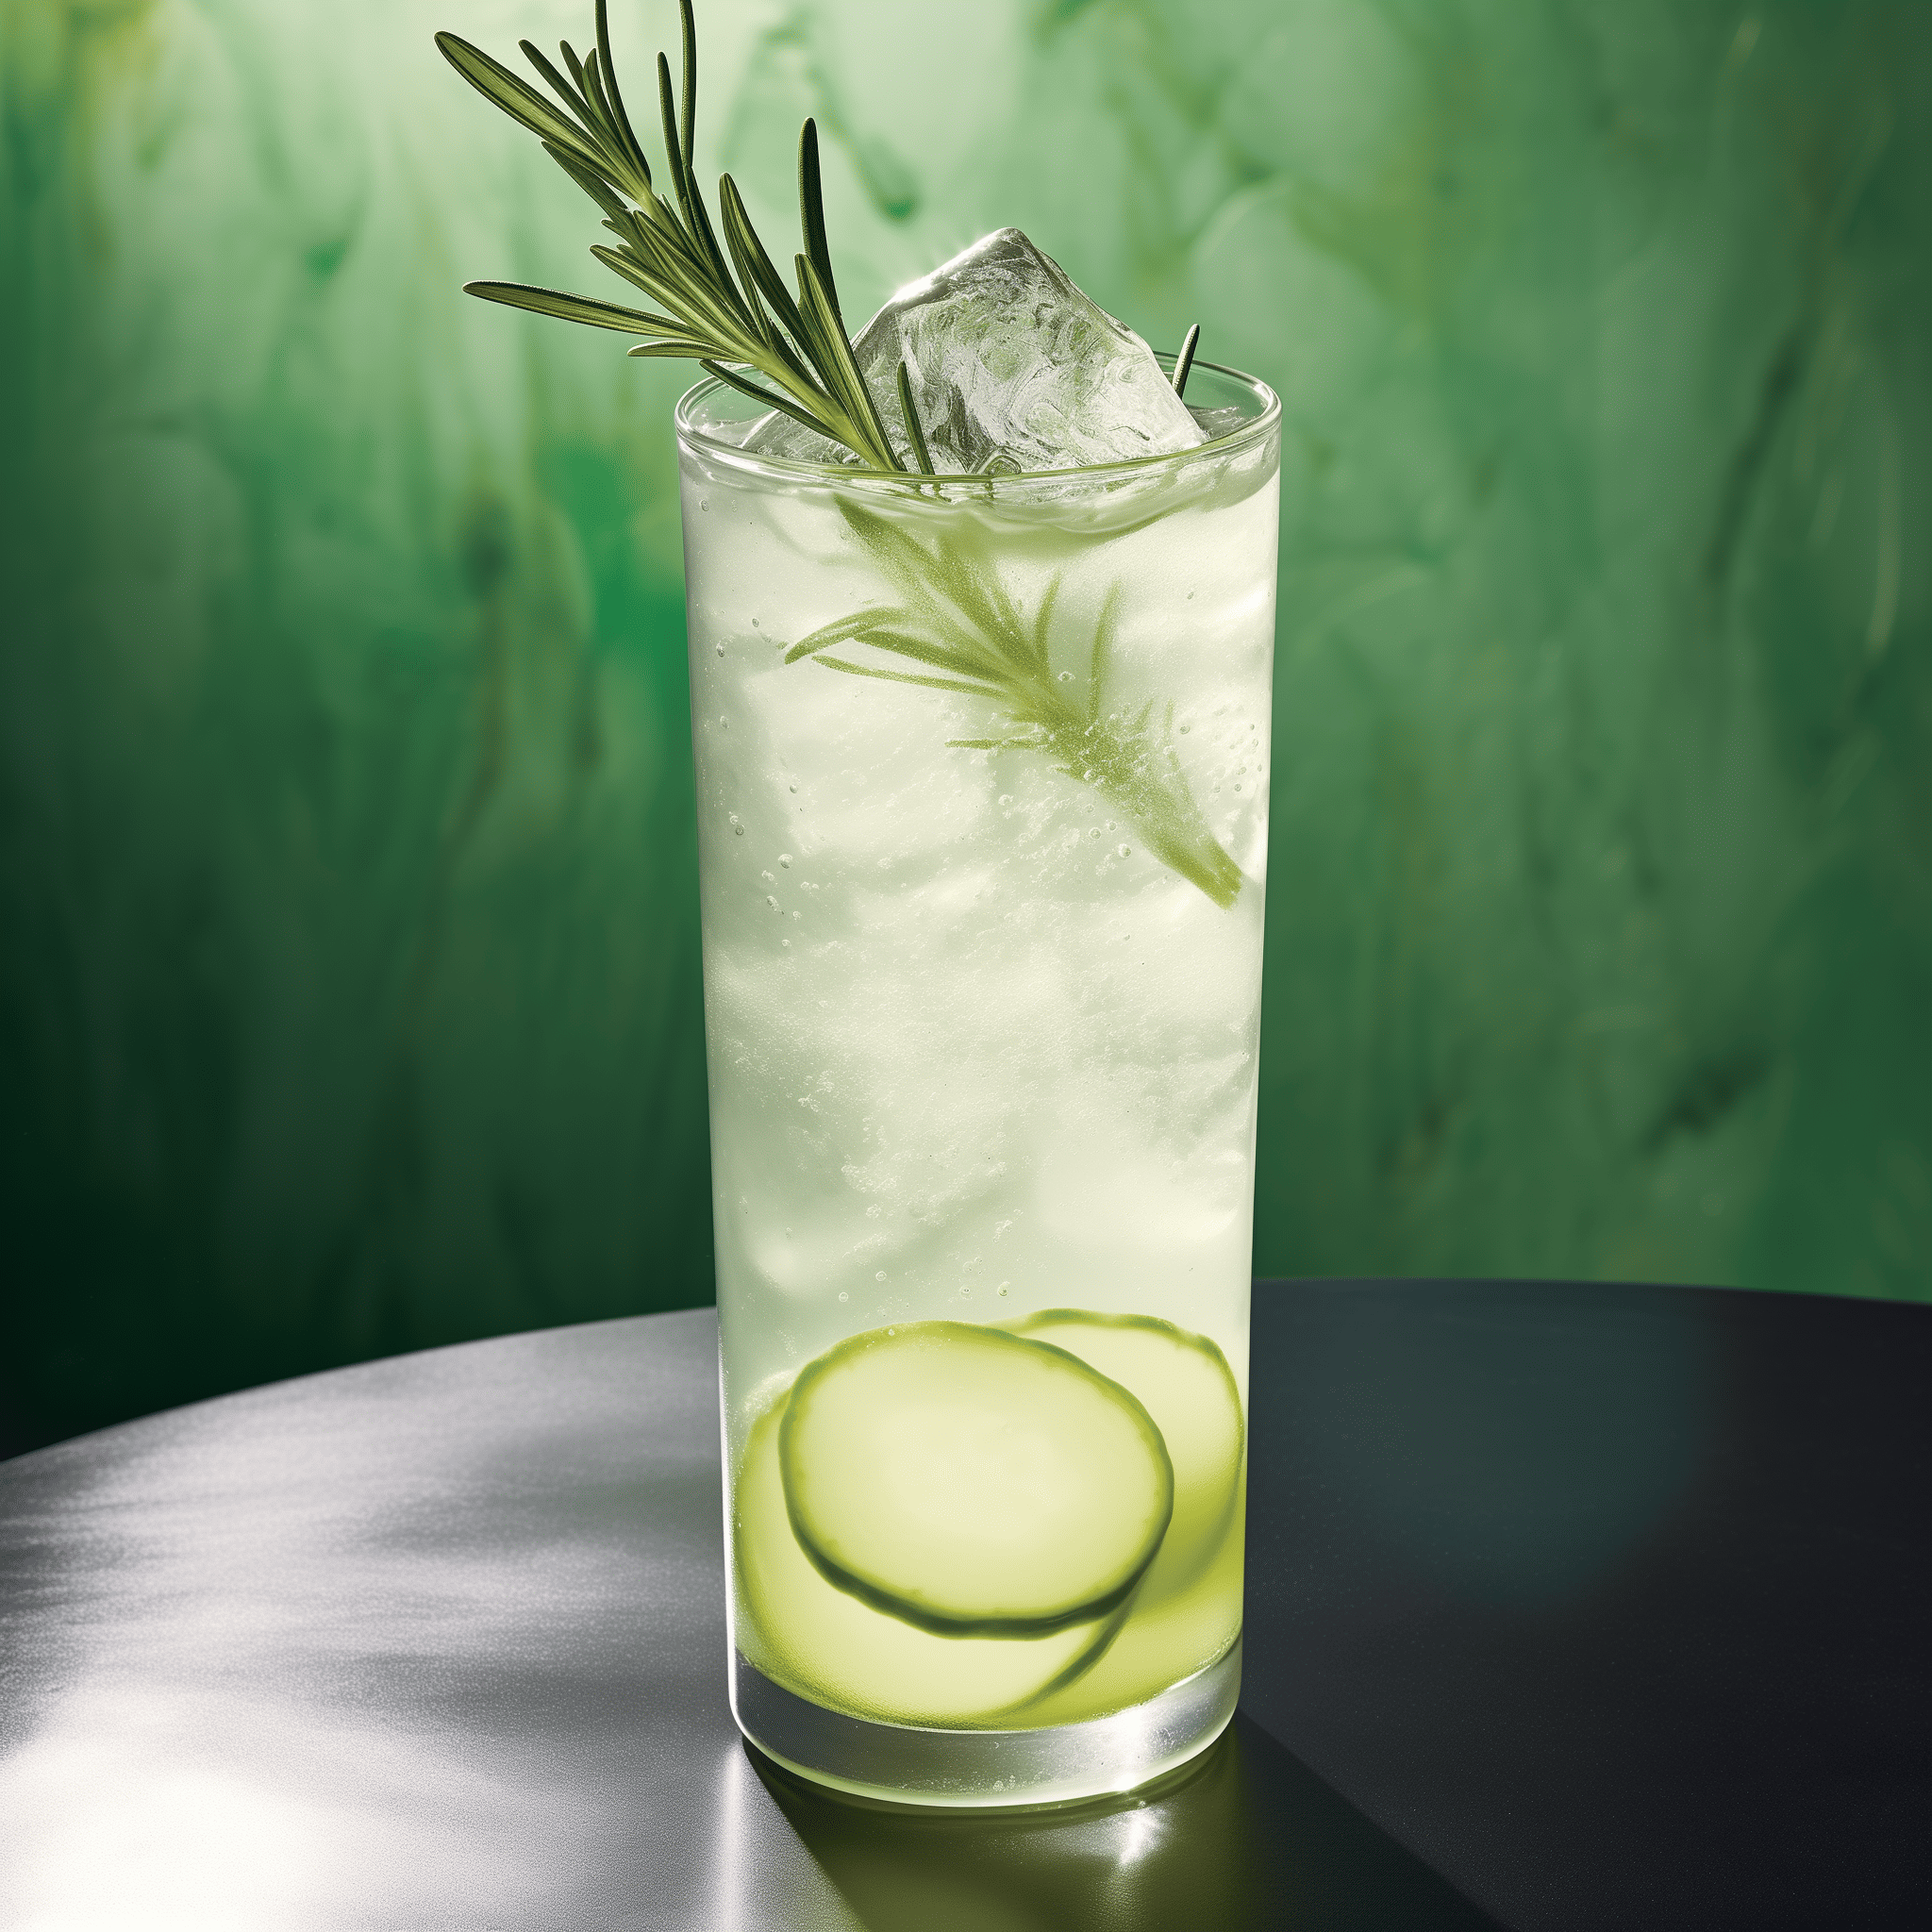 Cucumber-Rosemary Gin & Tonic Cocktail Recipe - The Cucumber-Rosemary Gin & Tonic offers a harmonious blend of botanical gin, the crispness of fresh cucumber, the woody essence of rosemary, and the quinine bitterness from the tonic. It's refreshing, slightly sweet, and herbaceous with a subtle bitterness that balances the drink.